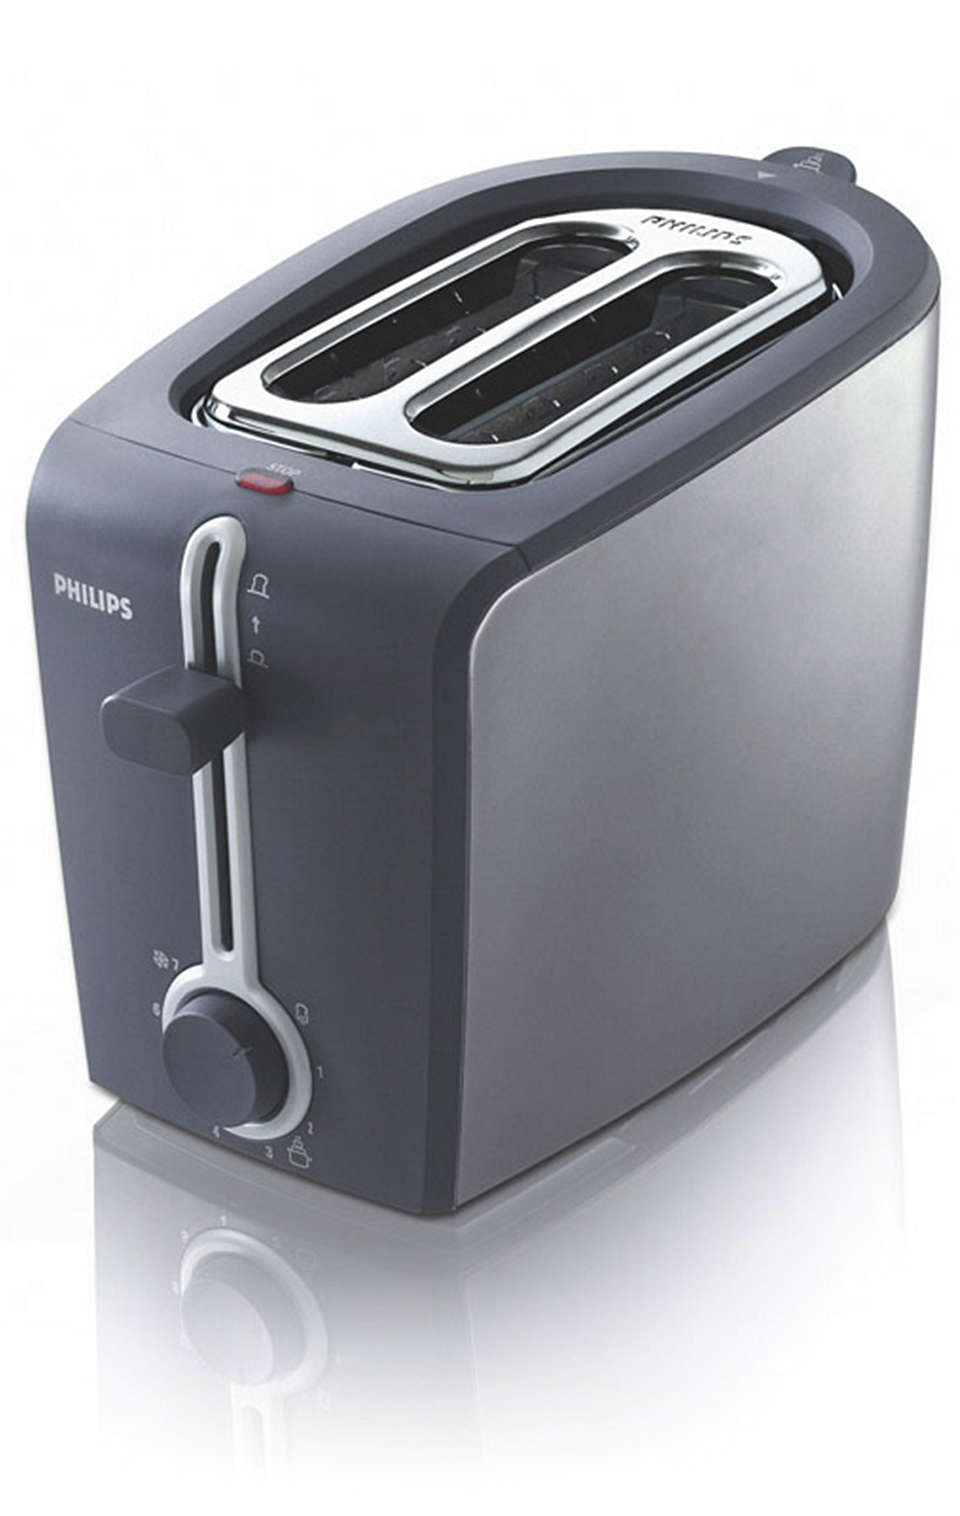 Great toast, easy cleaning